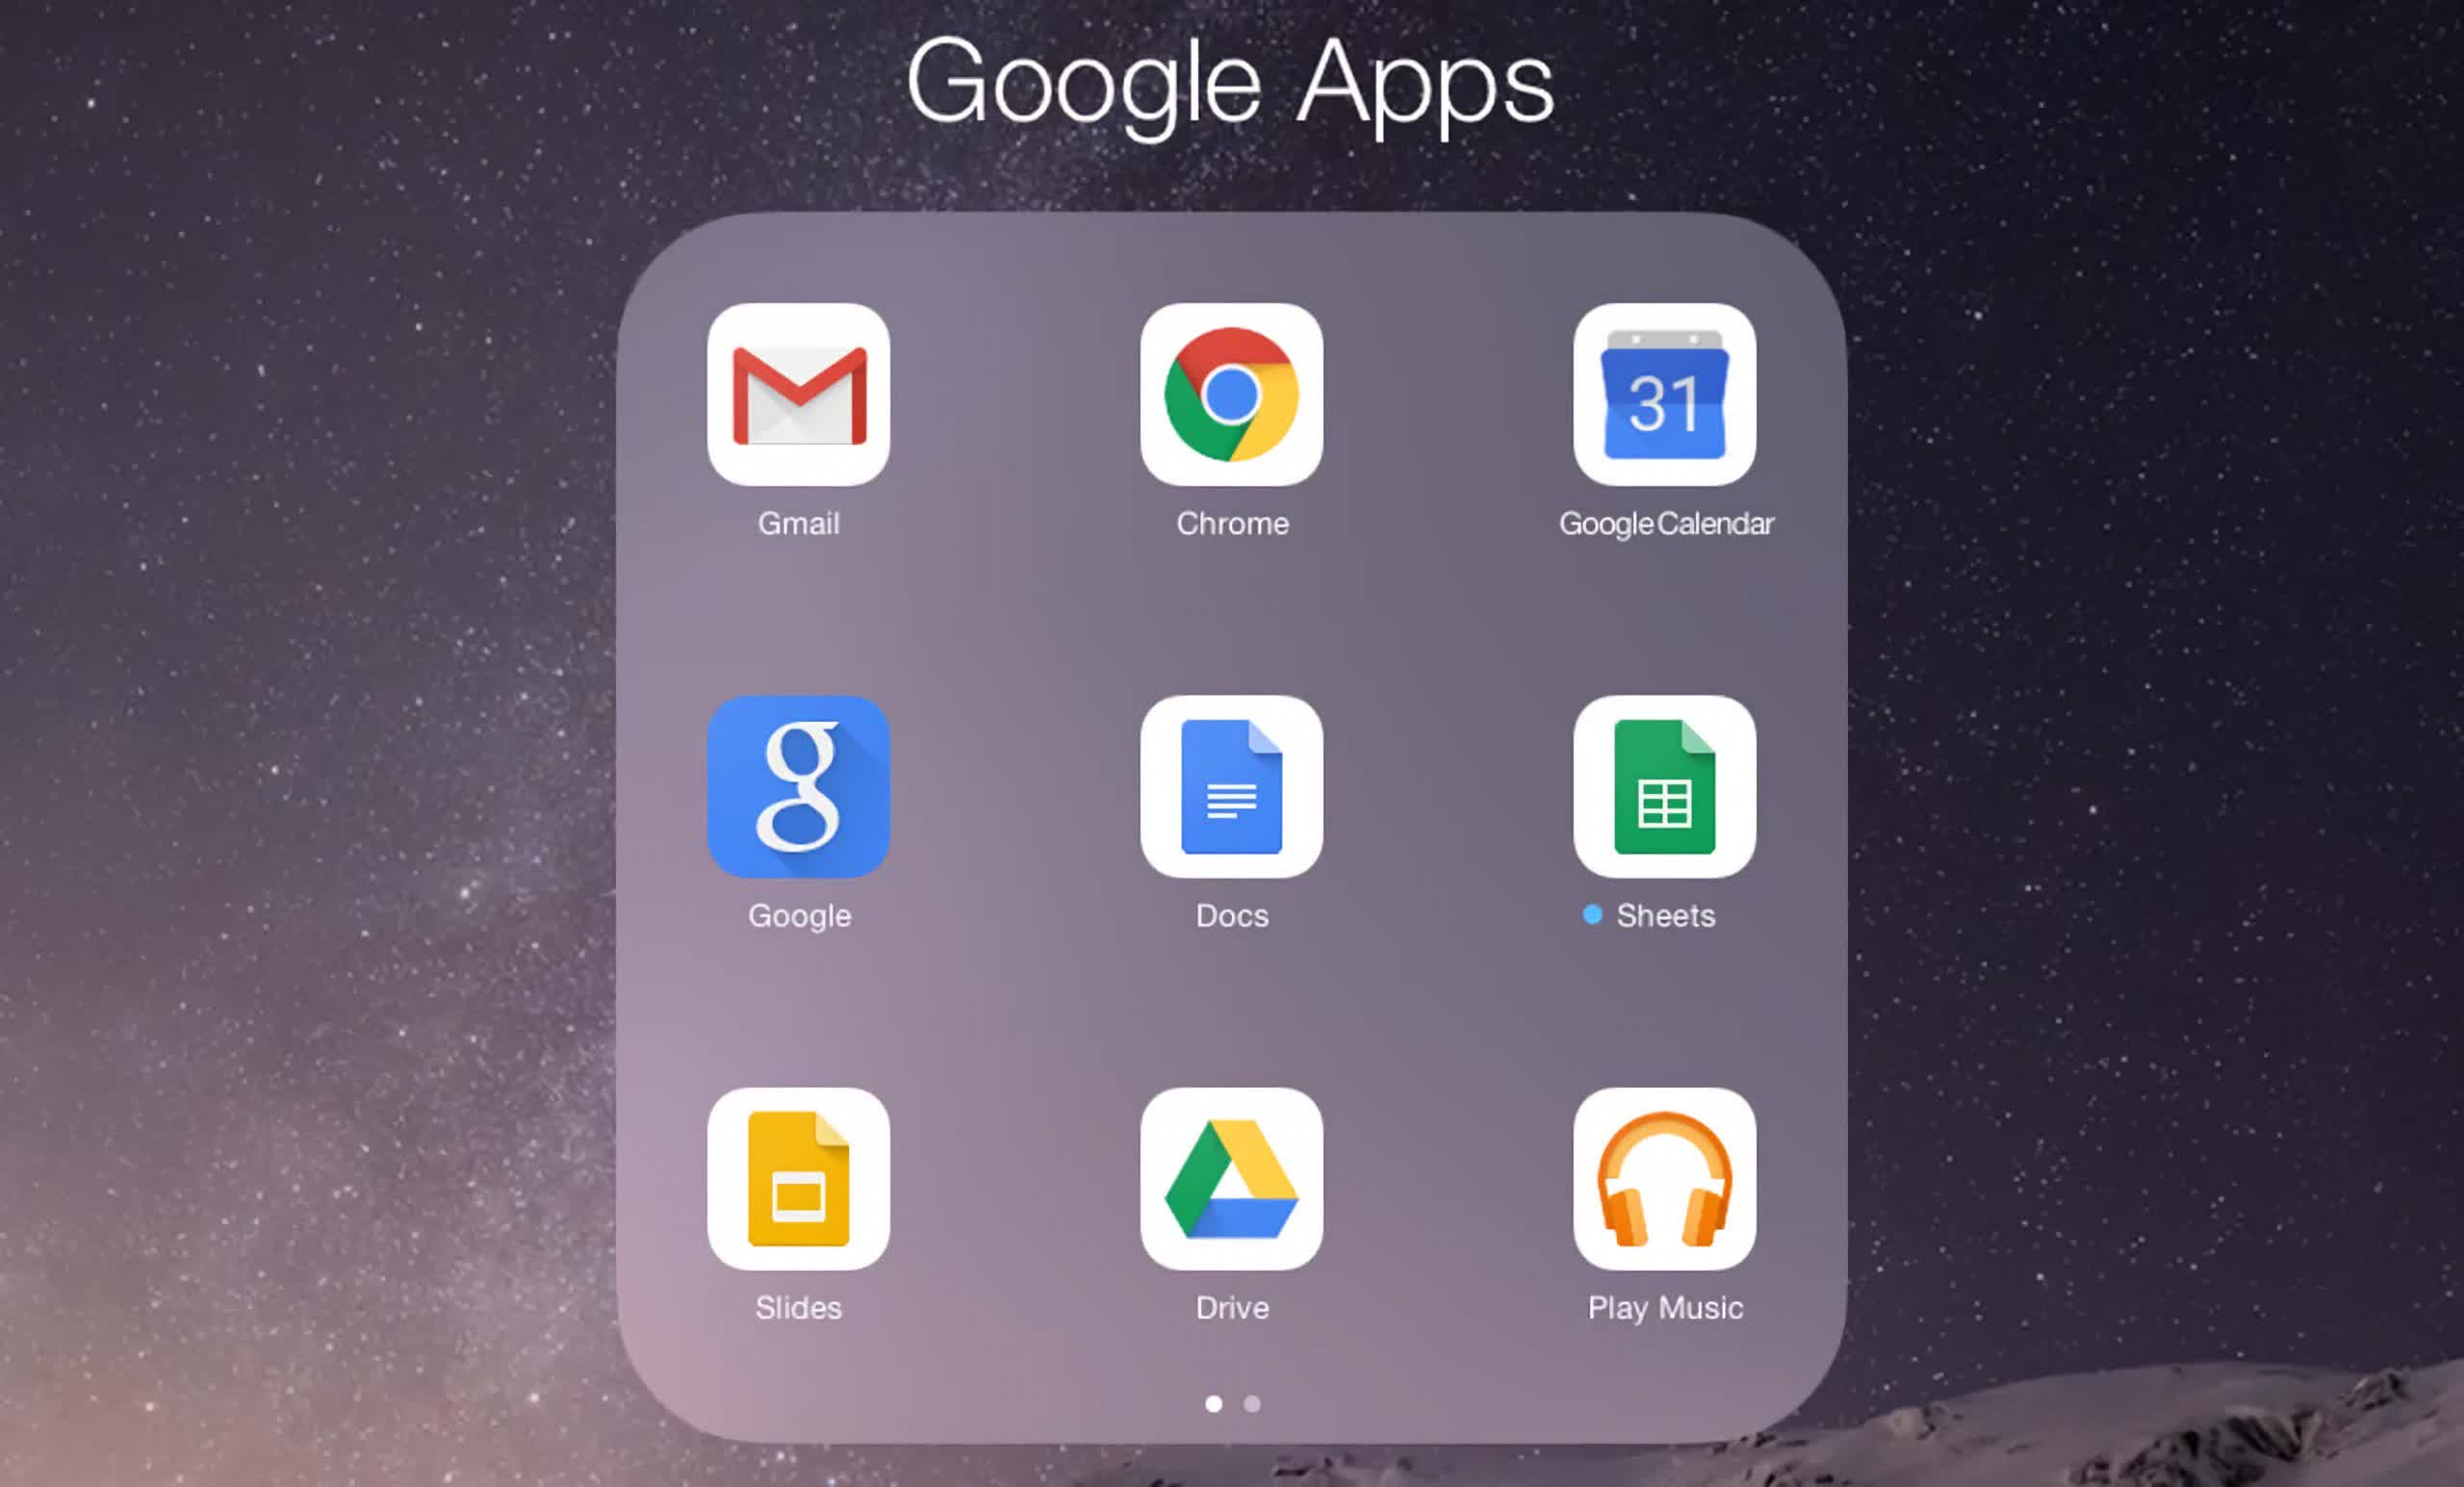 Google still has not updated most of its iOS apps since privacy labeling took effect